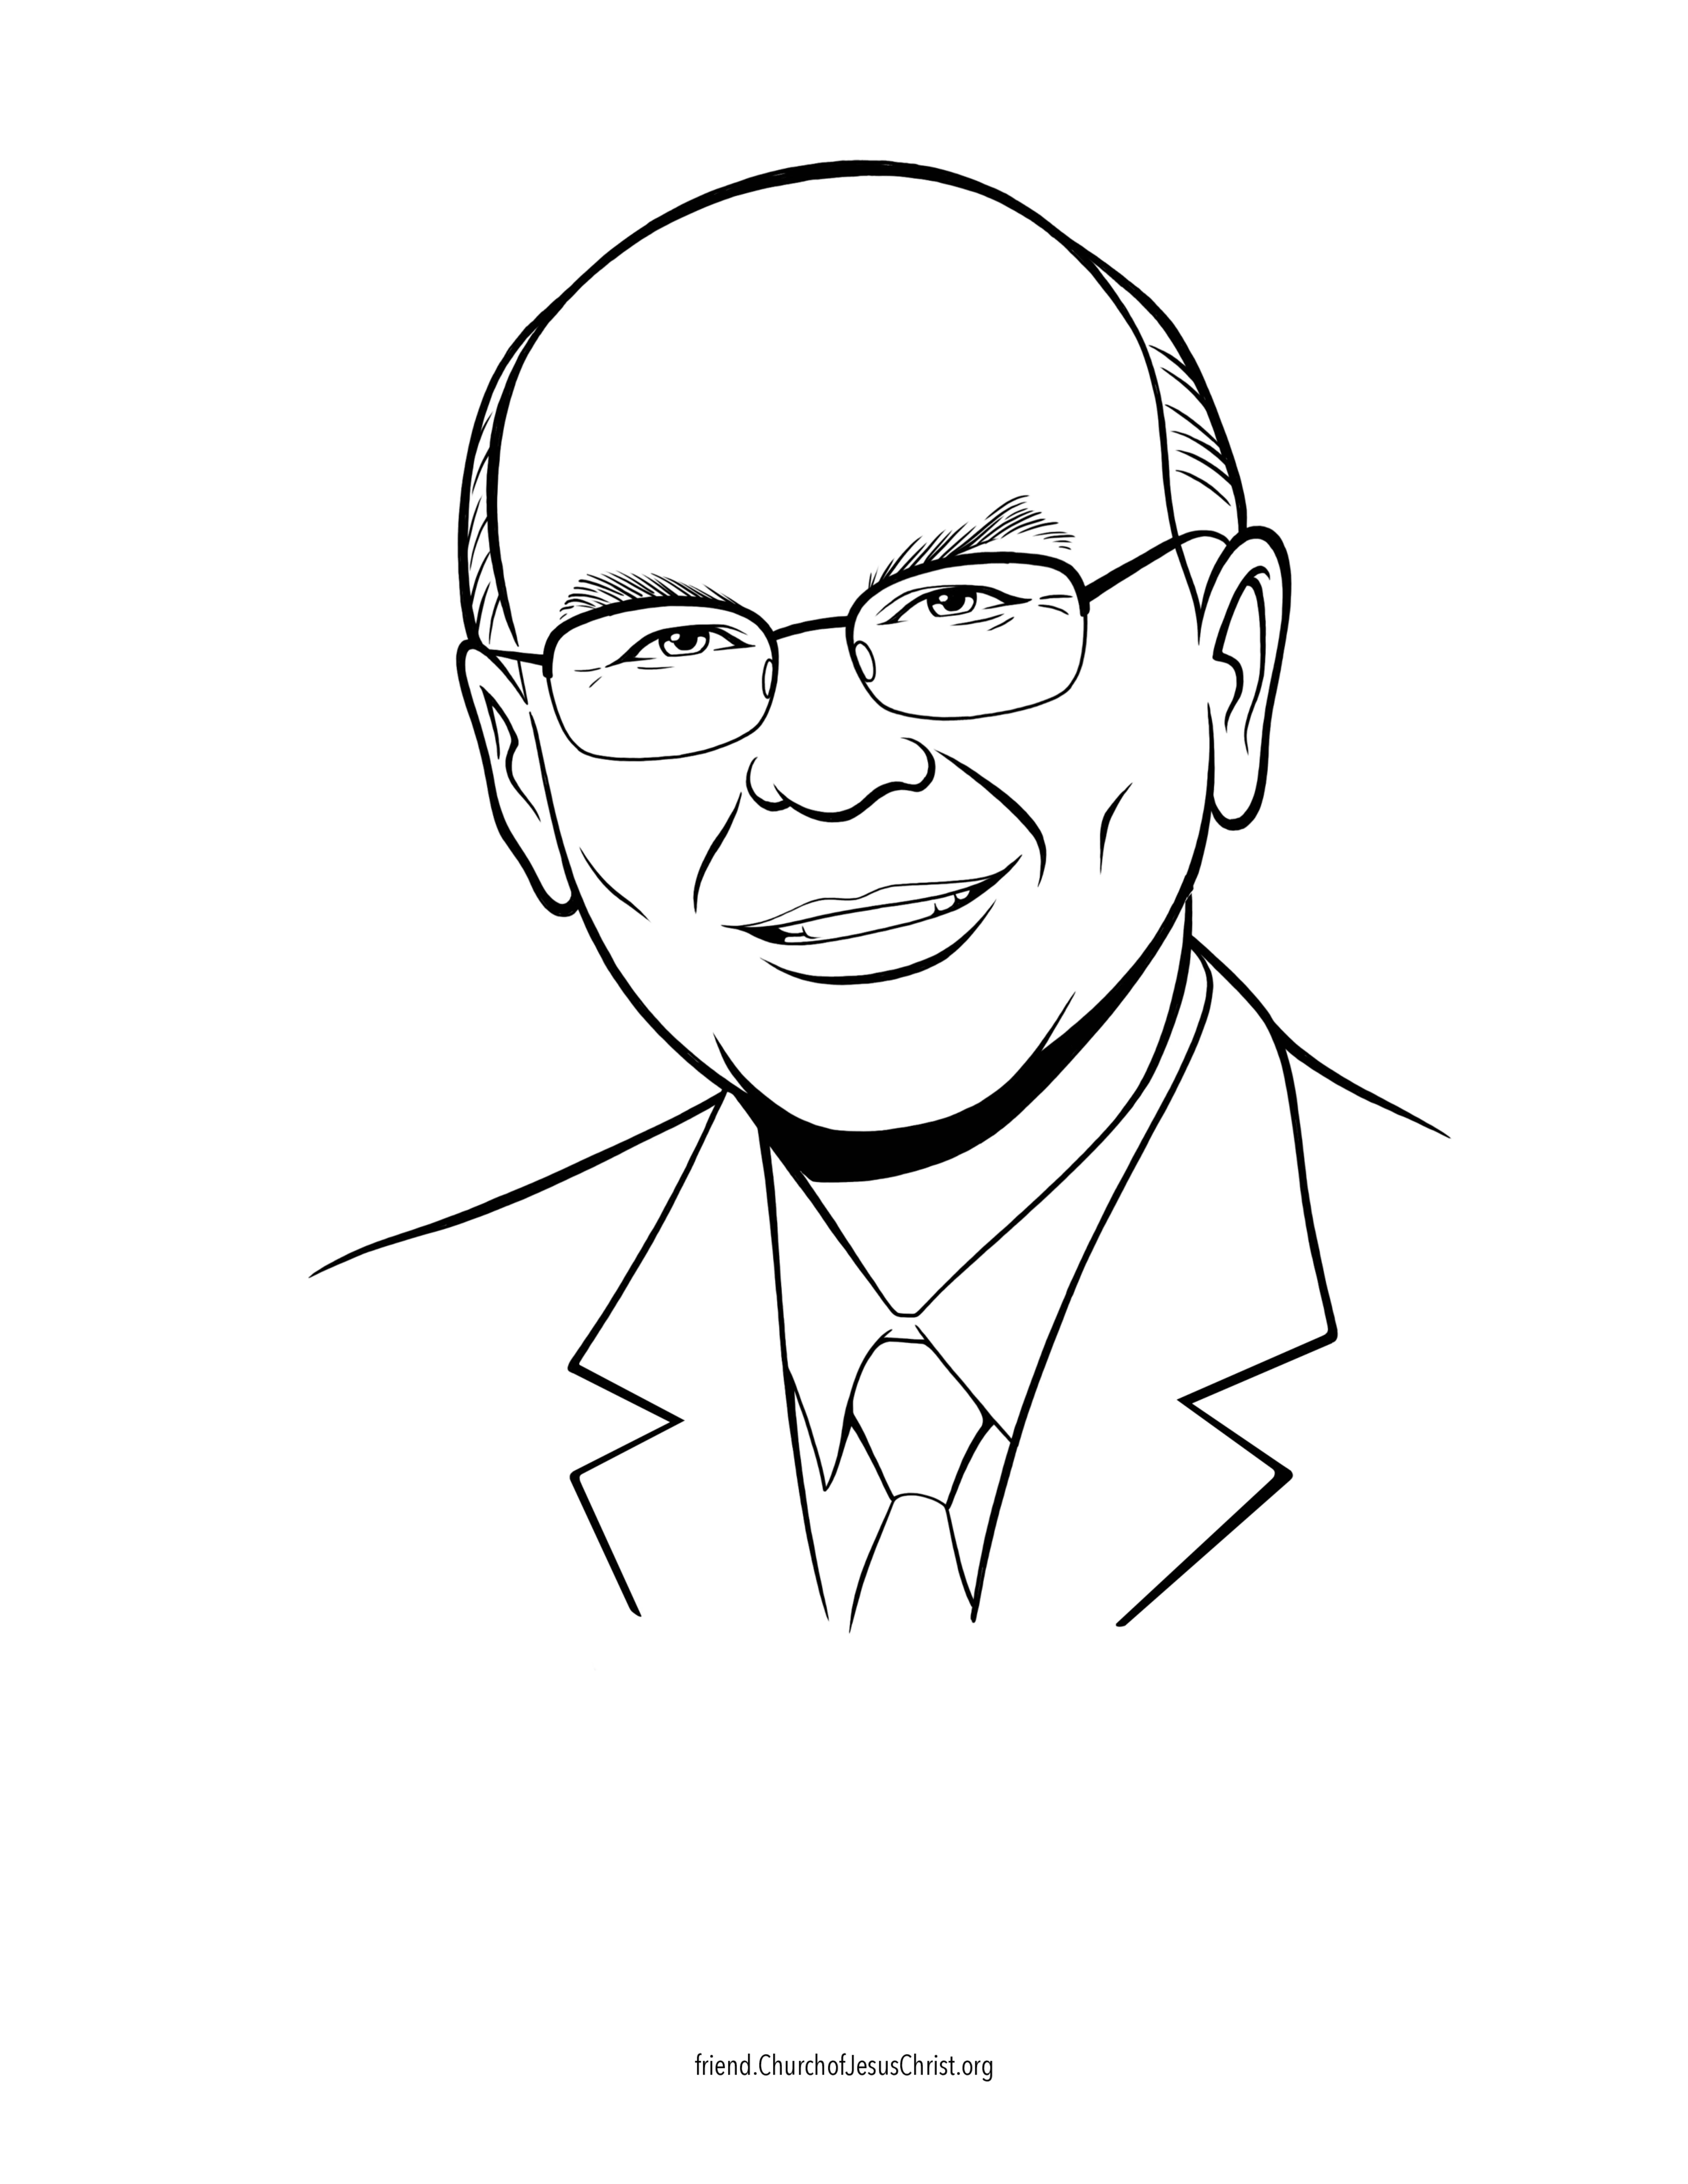 A coloring page of the official portrait of Quentin L. Cook.